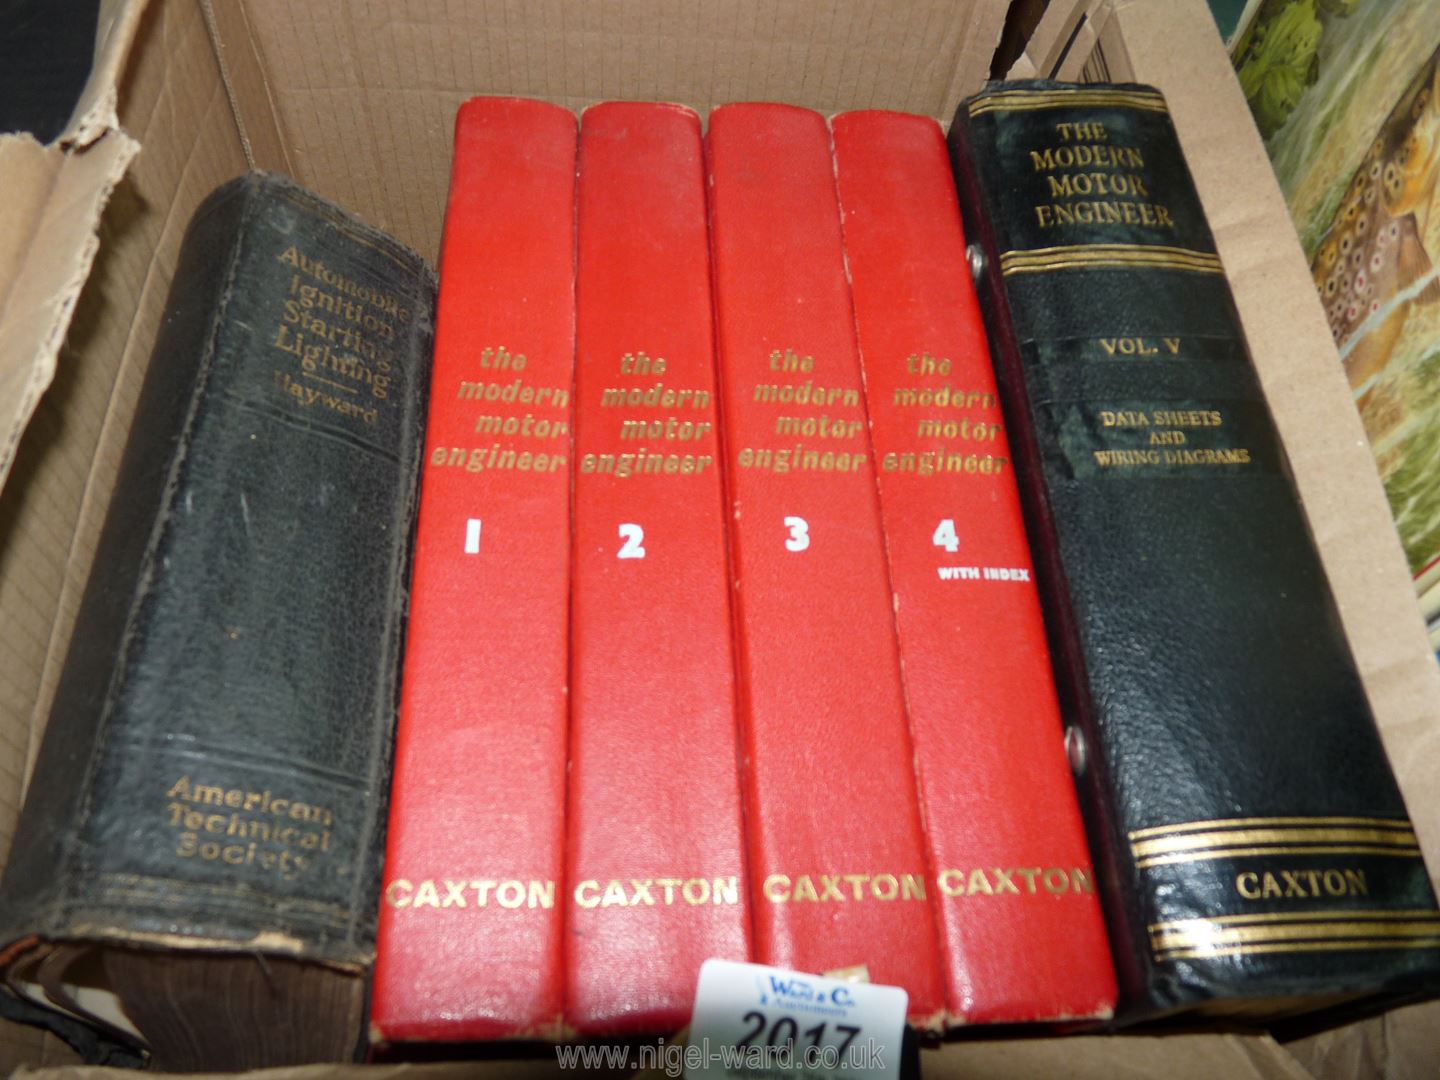 Five volumes of The Modern Motor Engineer by Arthur W.